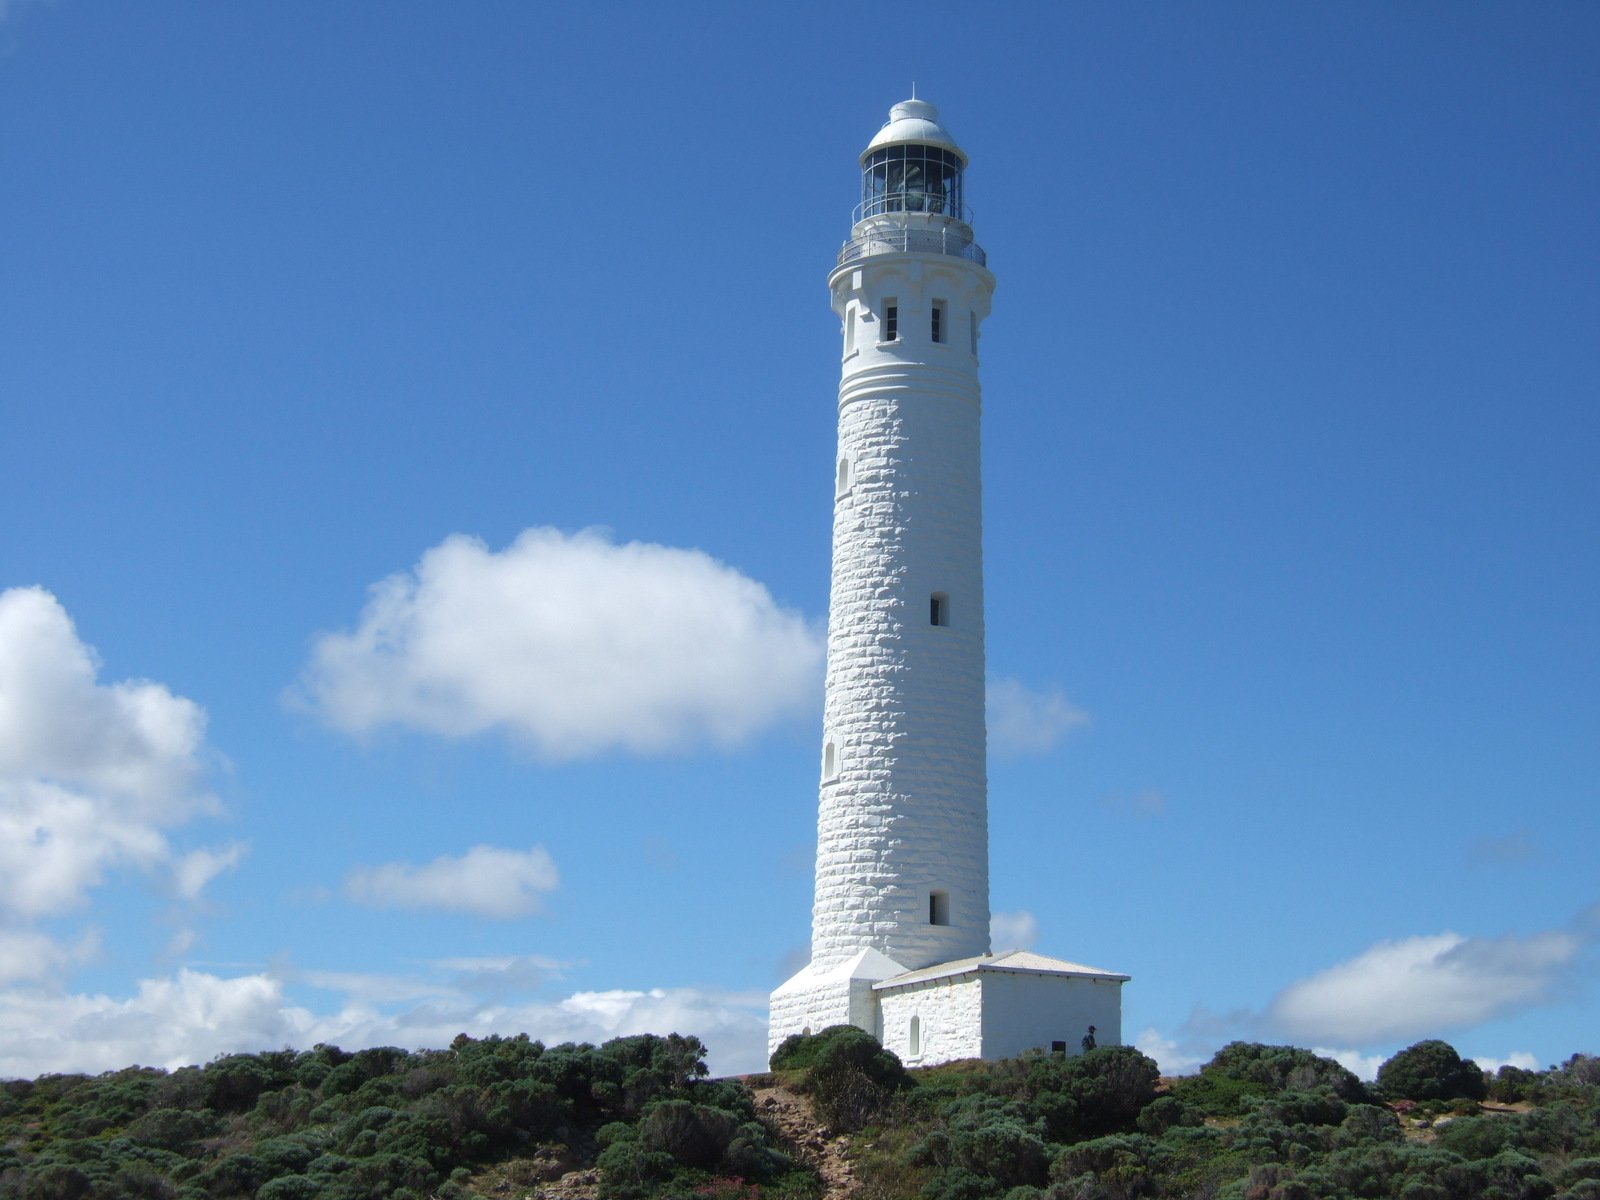 the lighthouse is surrounded by a small hill